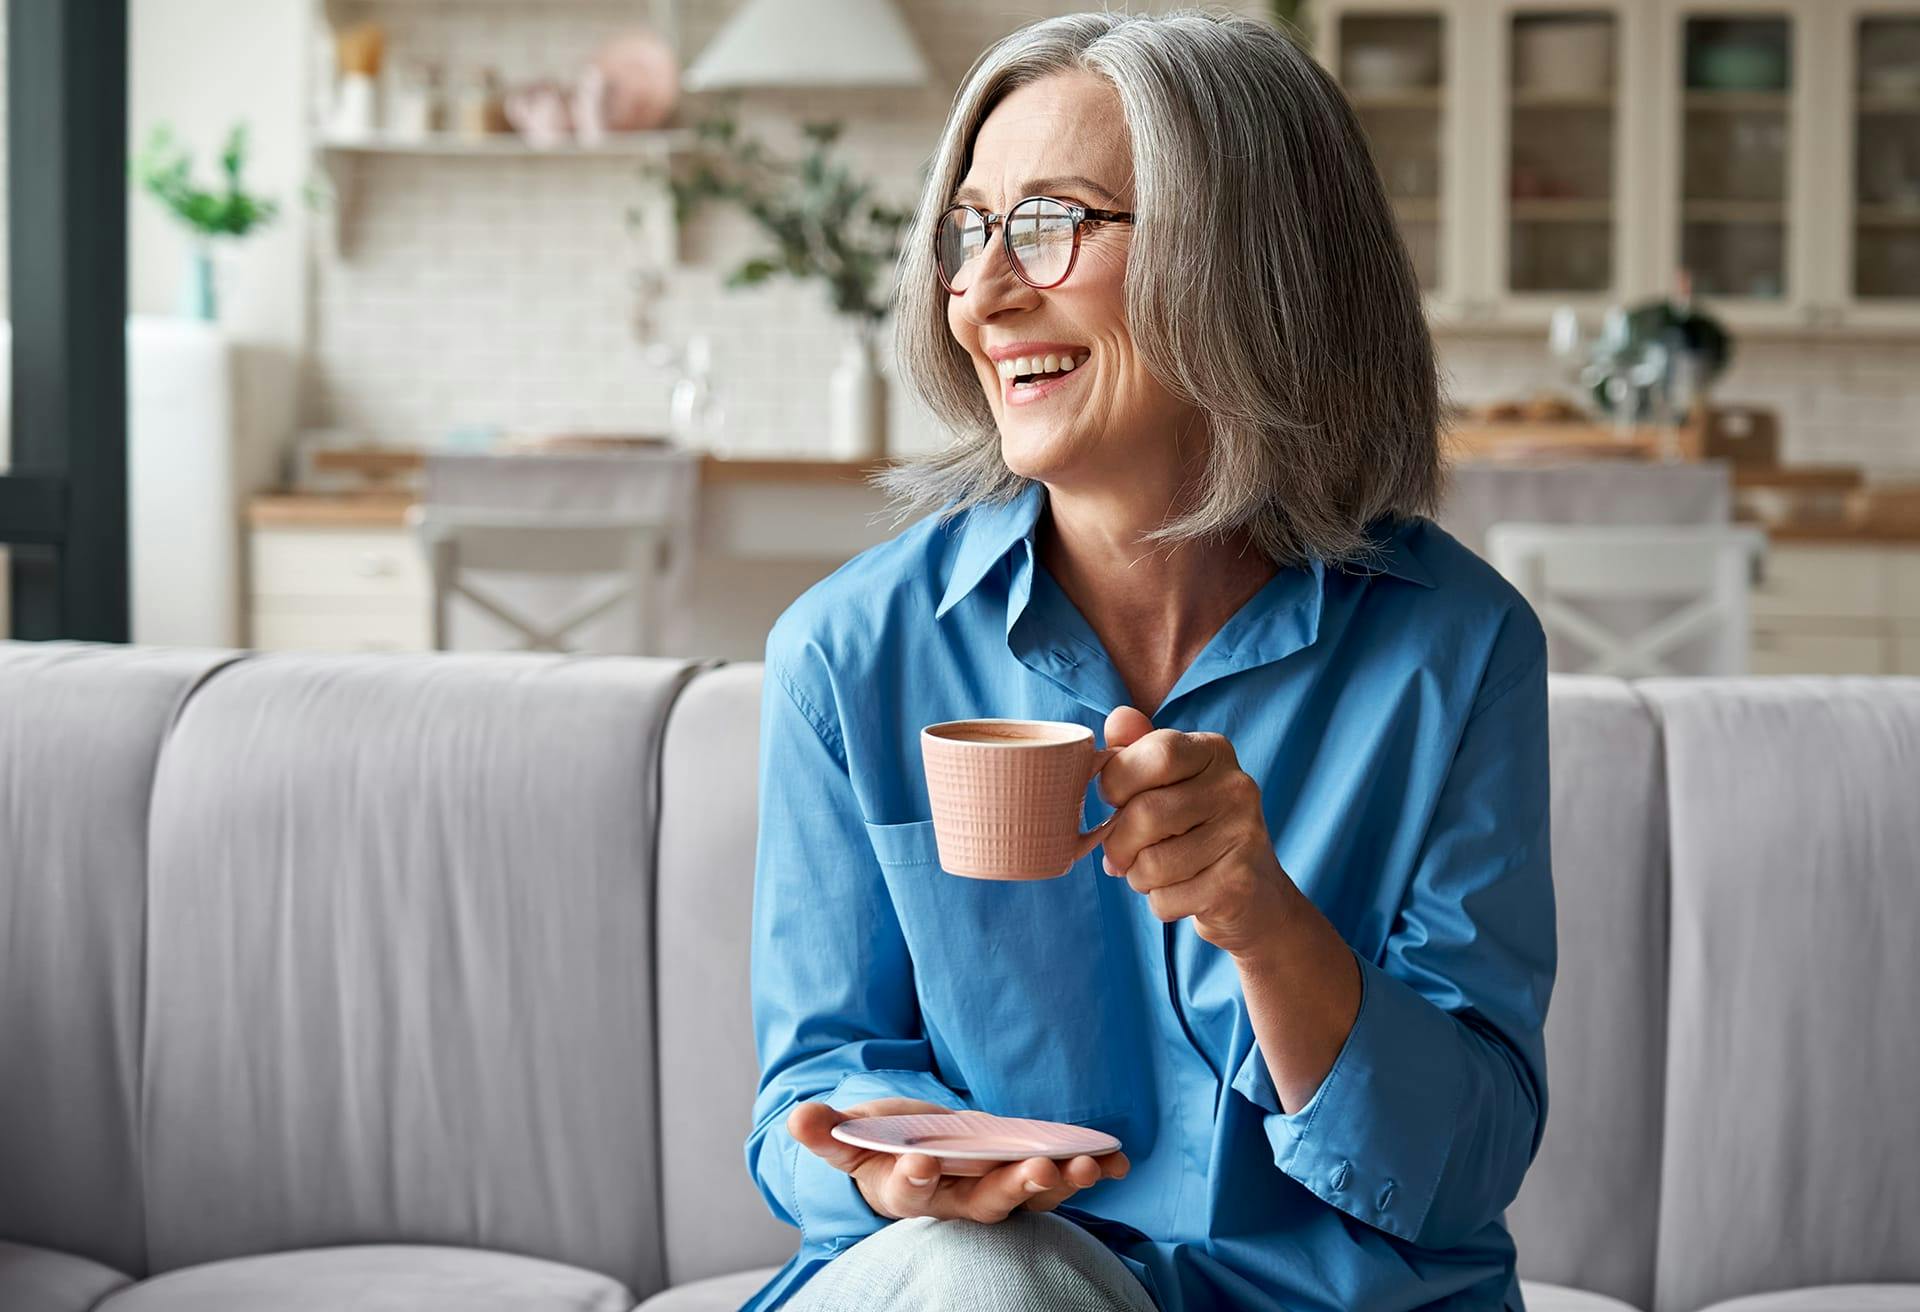 Woman enjoying coffee while sitting on a couch